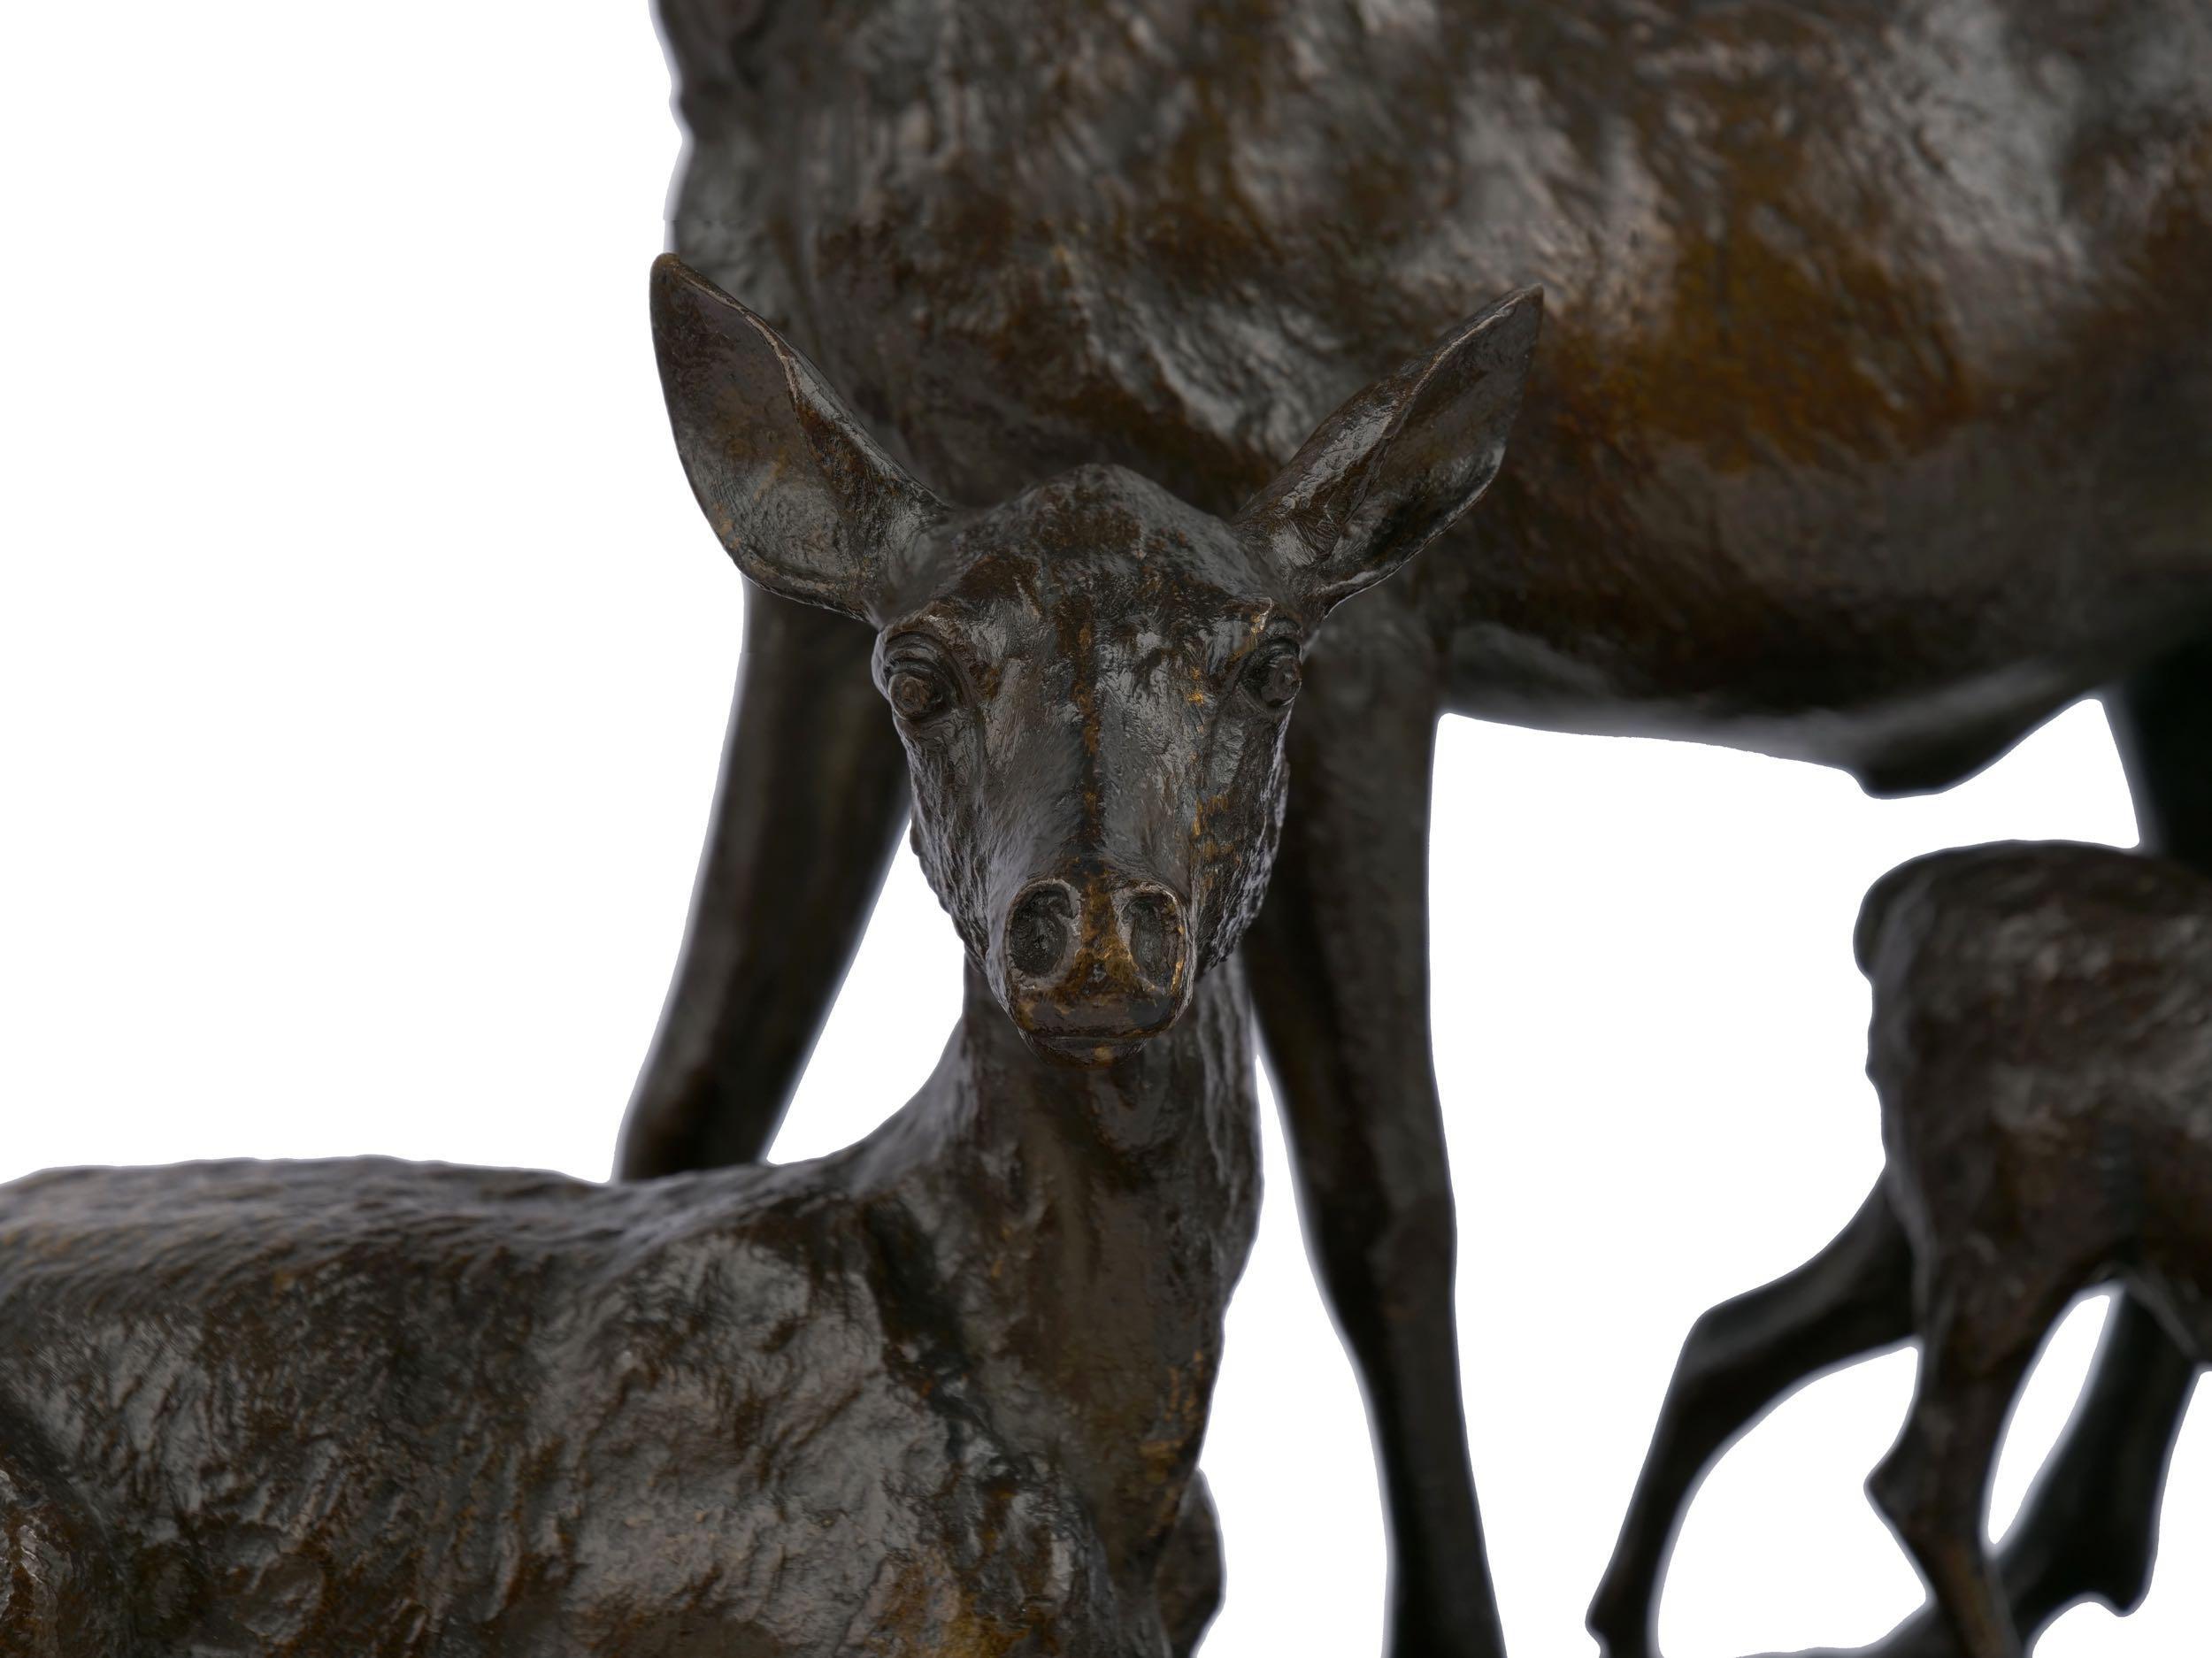 Bronze Sculpture Group “Family of Deer” by Christophe Fratin & Debraux Foundry 6